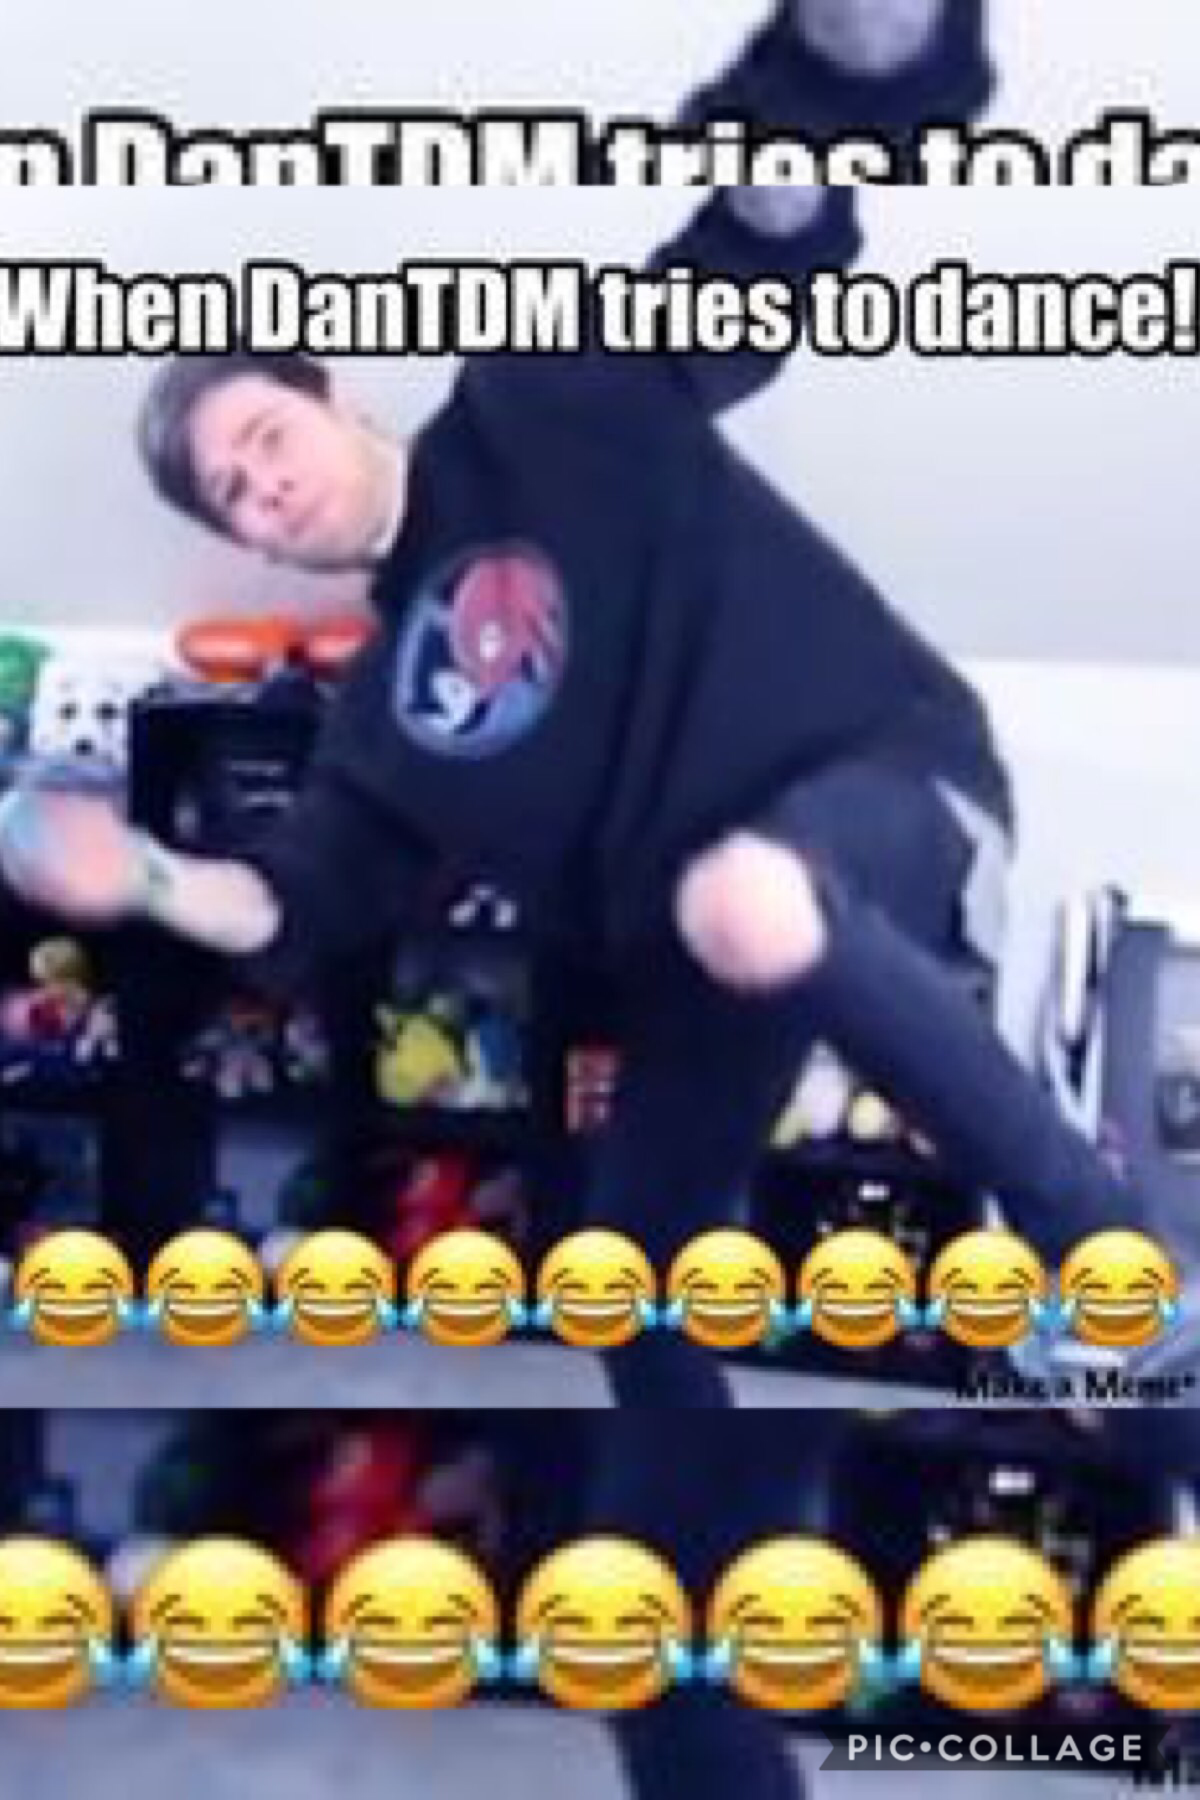 He can’t dance... 😂